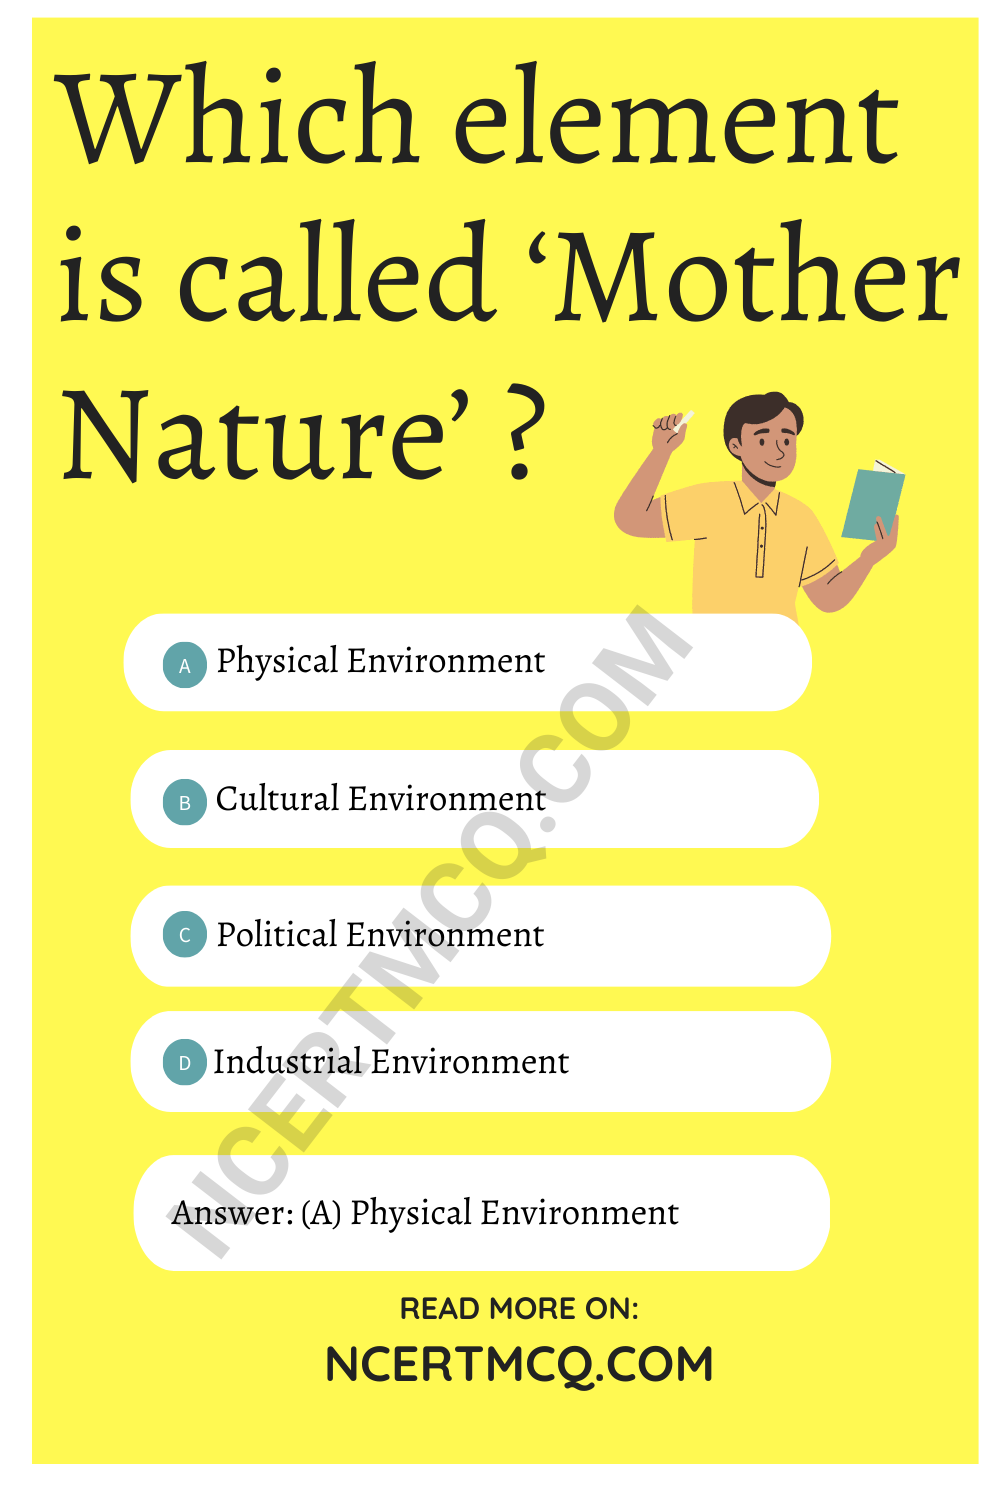 Which element is called ‘Mother Nature’ ?